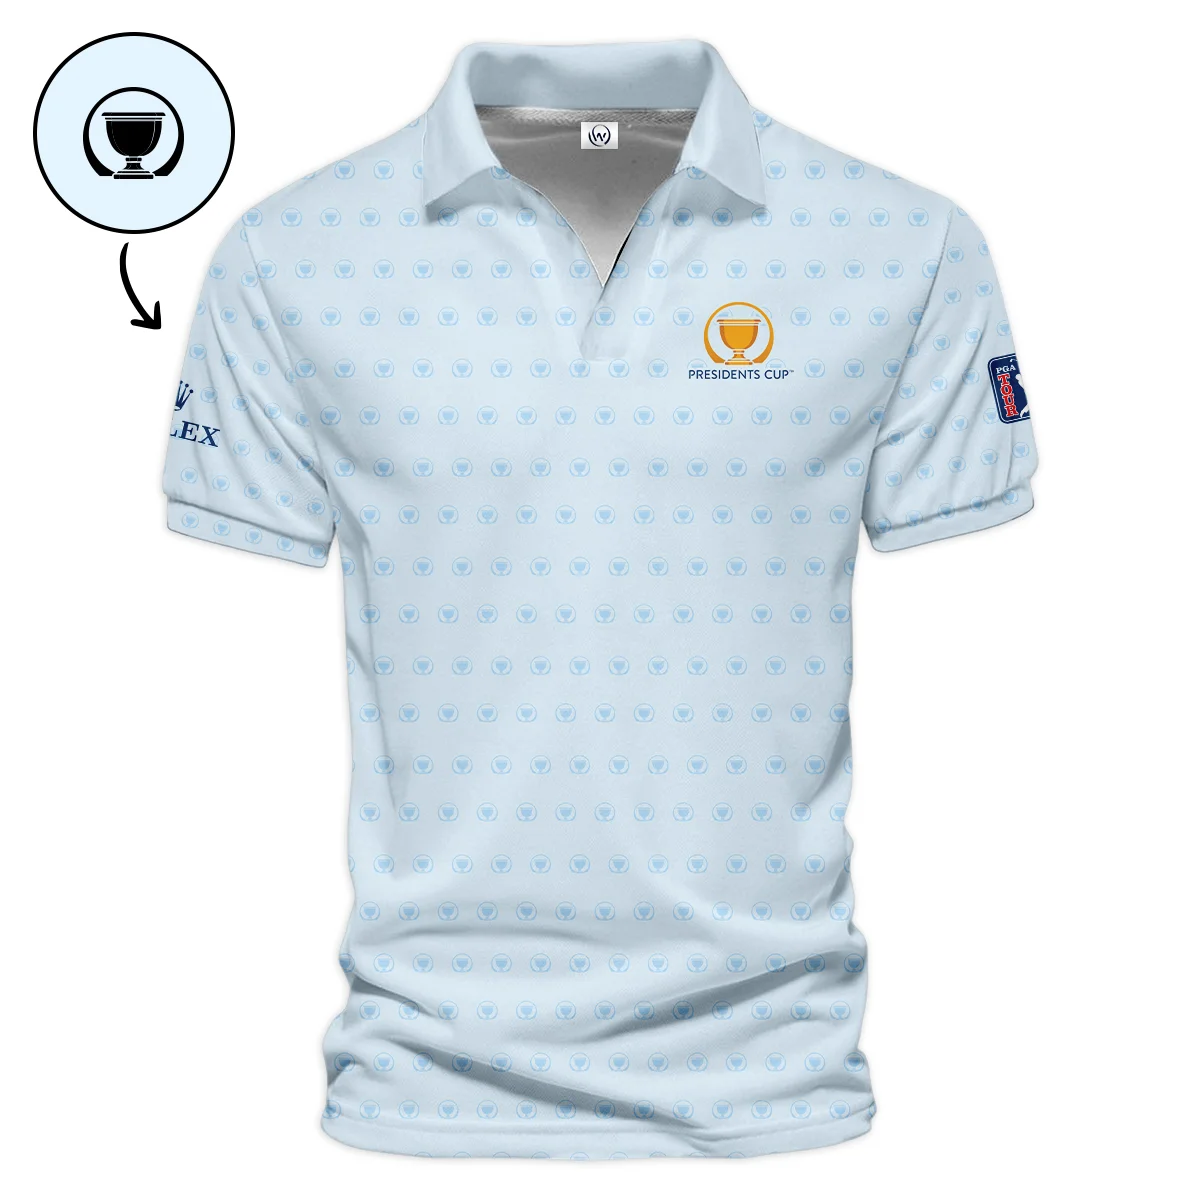 Presidents Cup Light Blue Golf Purple Patern Background Rolex Vneck Polo Shirt Style Classic